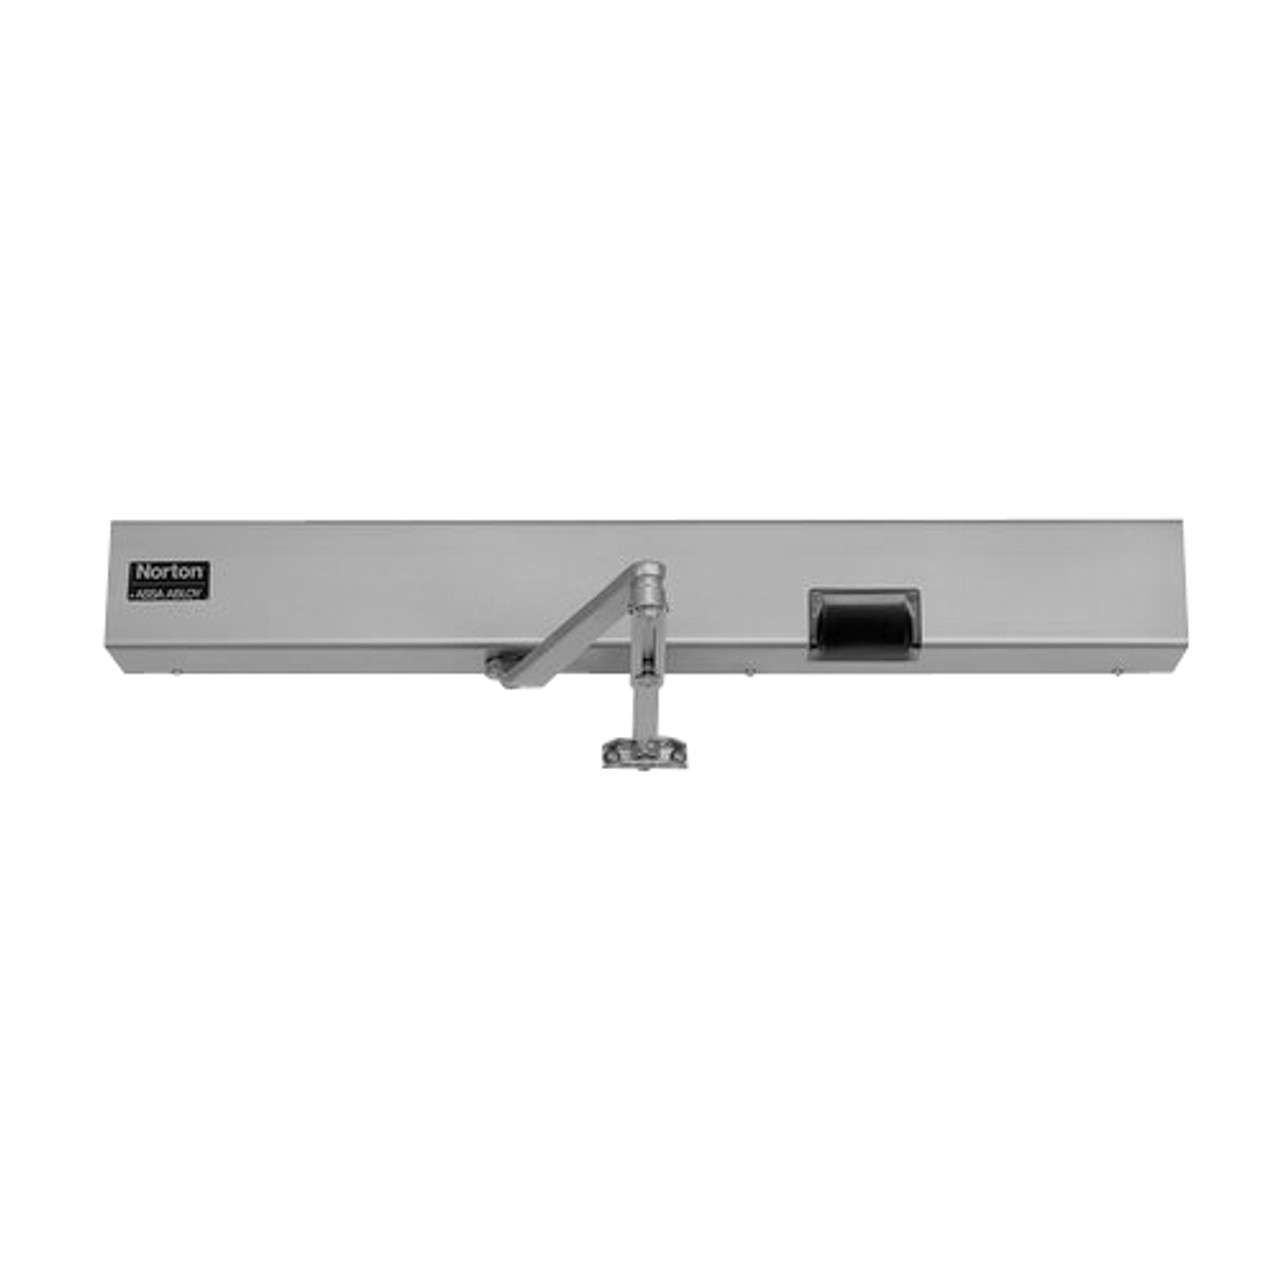 7125SZ-RH-120VAC-689 Norton 7100SZ Series Safe Zone Multi-Point Closer/Holder with Motion Sensor and Push Side Double Lever 11 inch Main Arm in Aluminum Finish